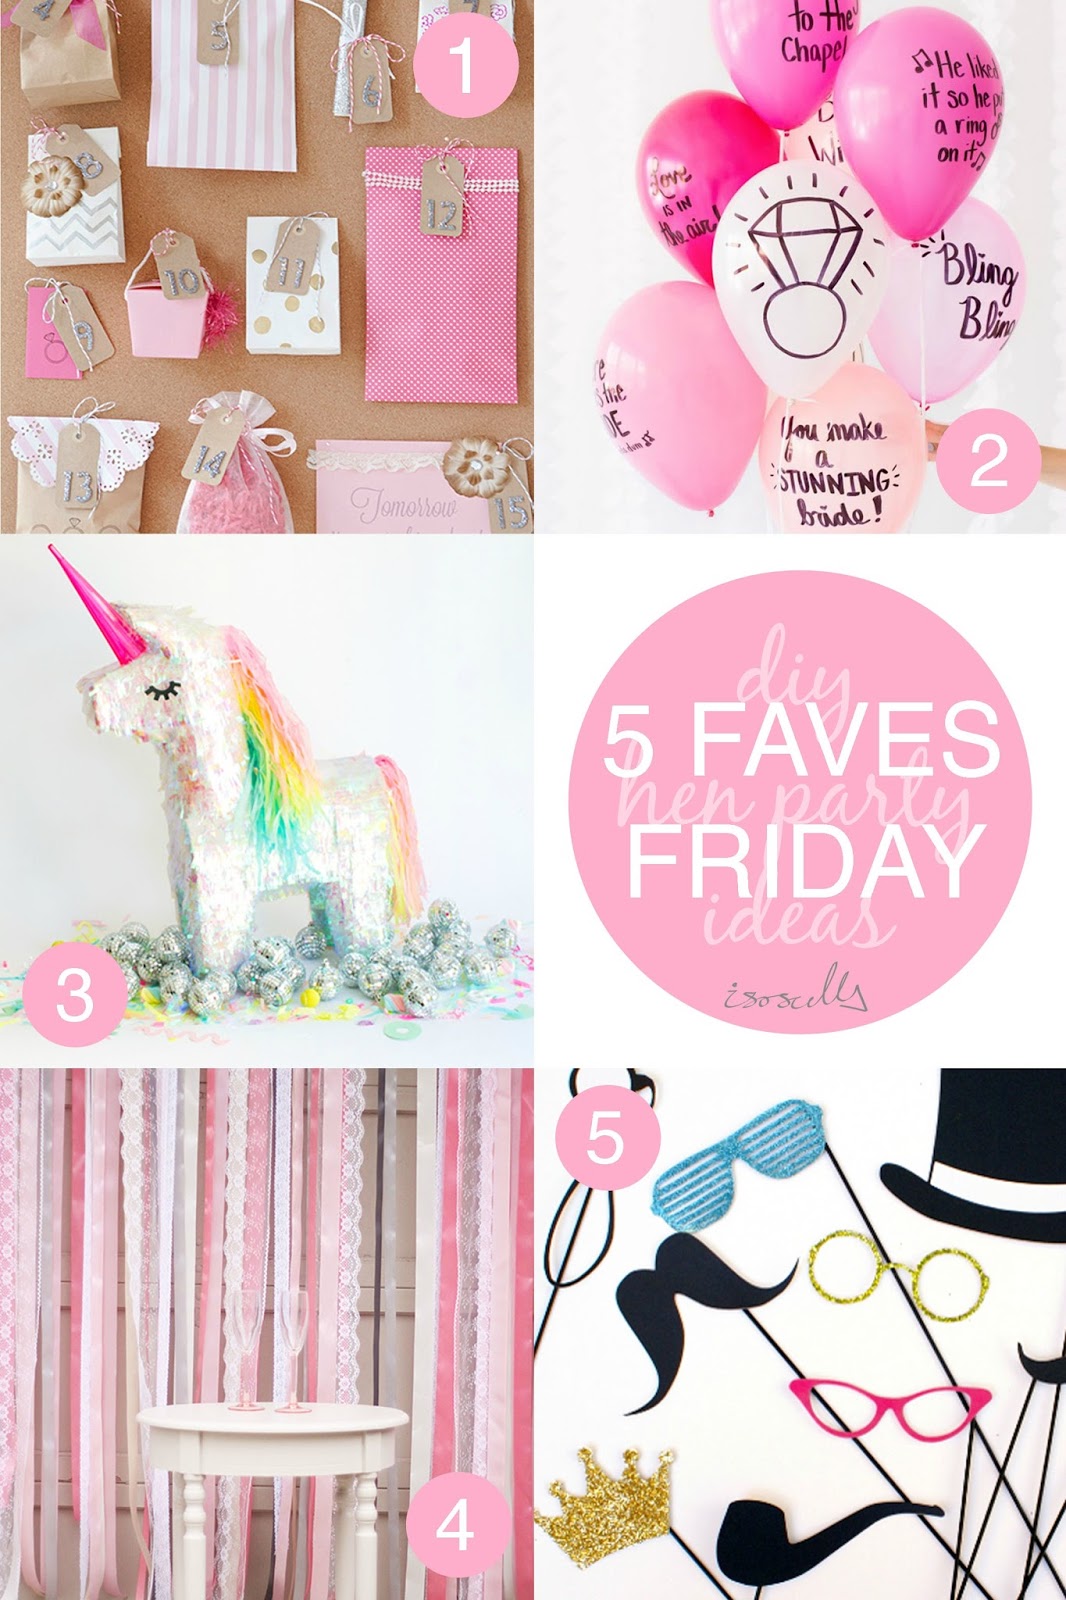 Five Faves Friday DIY Hen Party Ideas by Isoscella